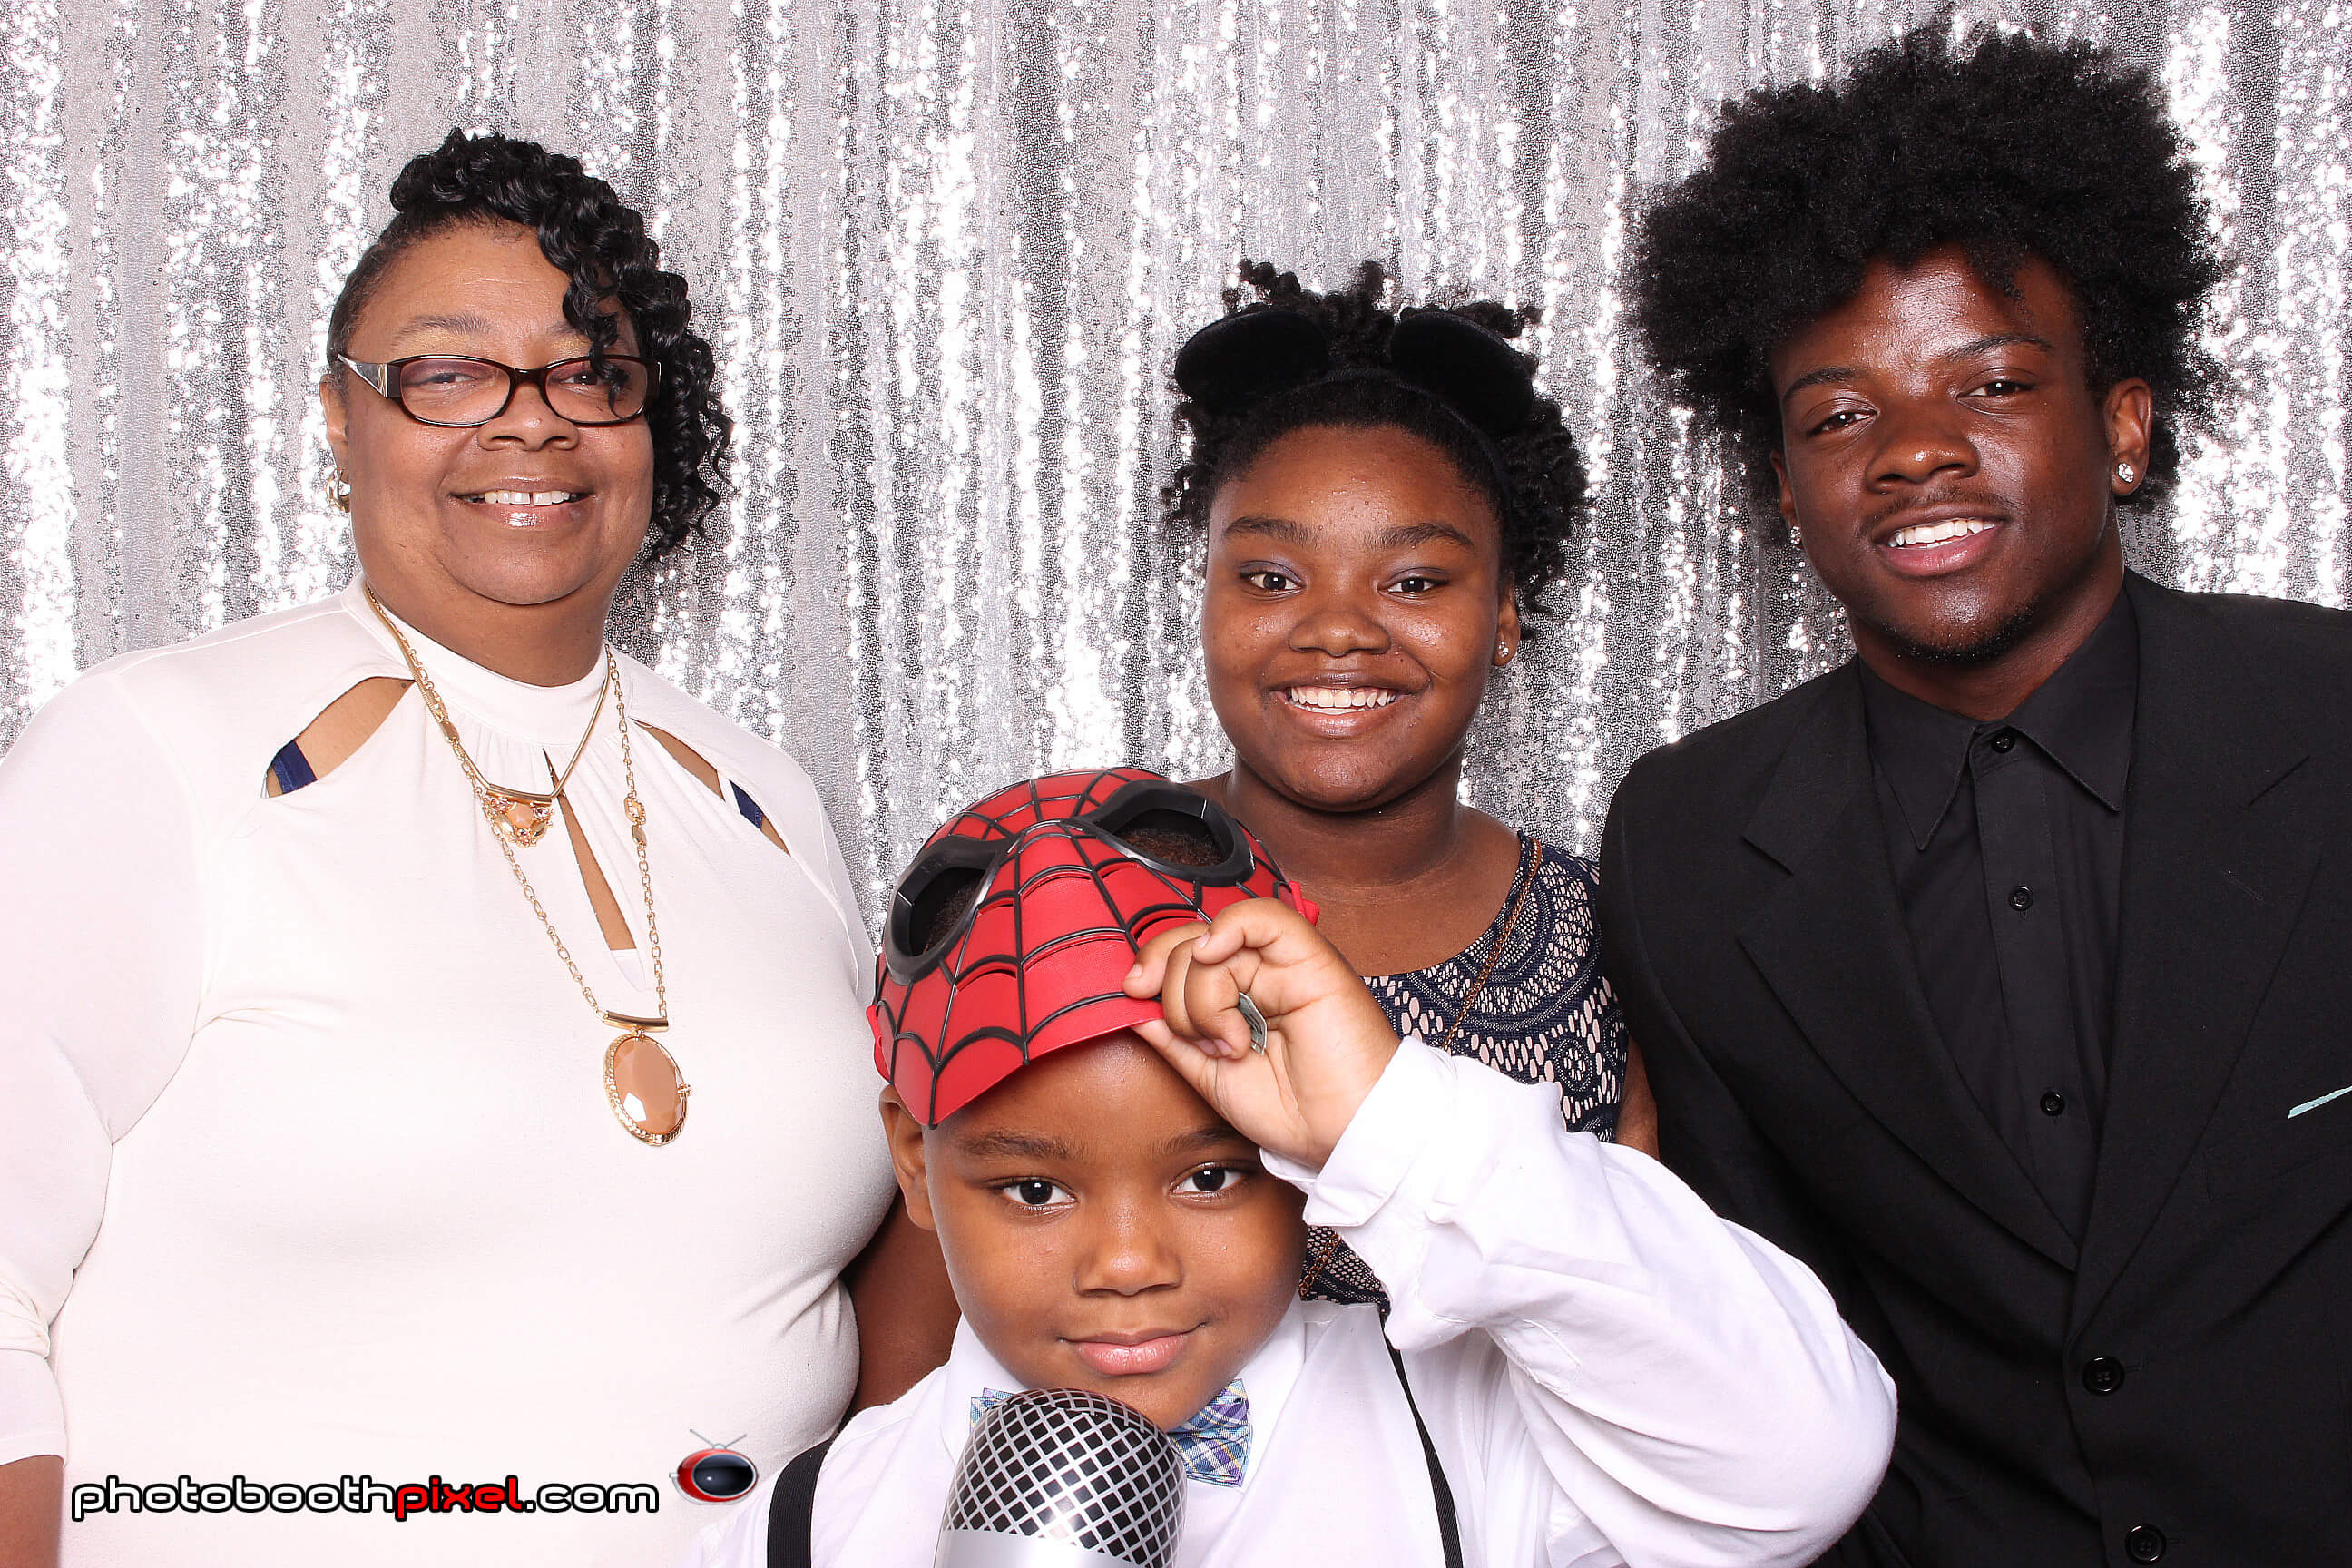 photo booth jacksonville embassy suites jacksonville baymeadows